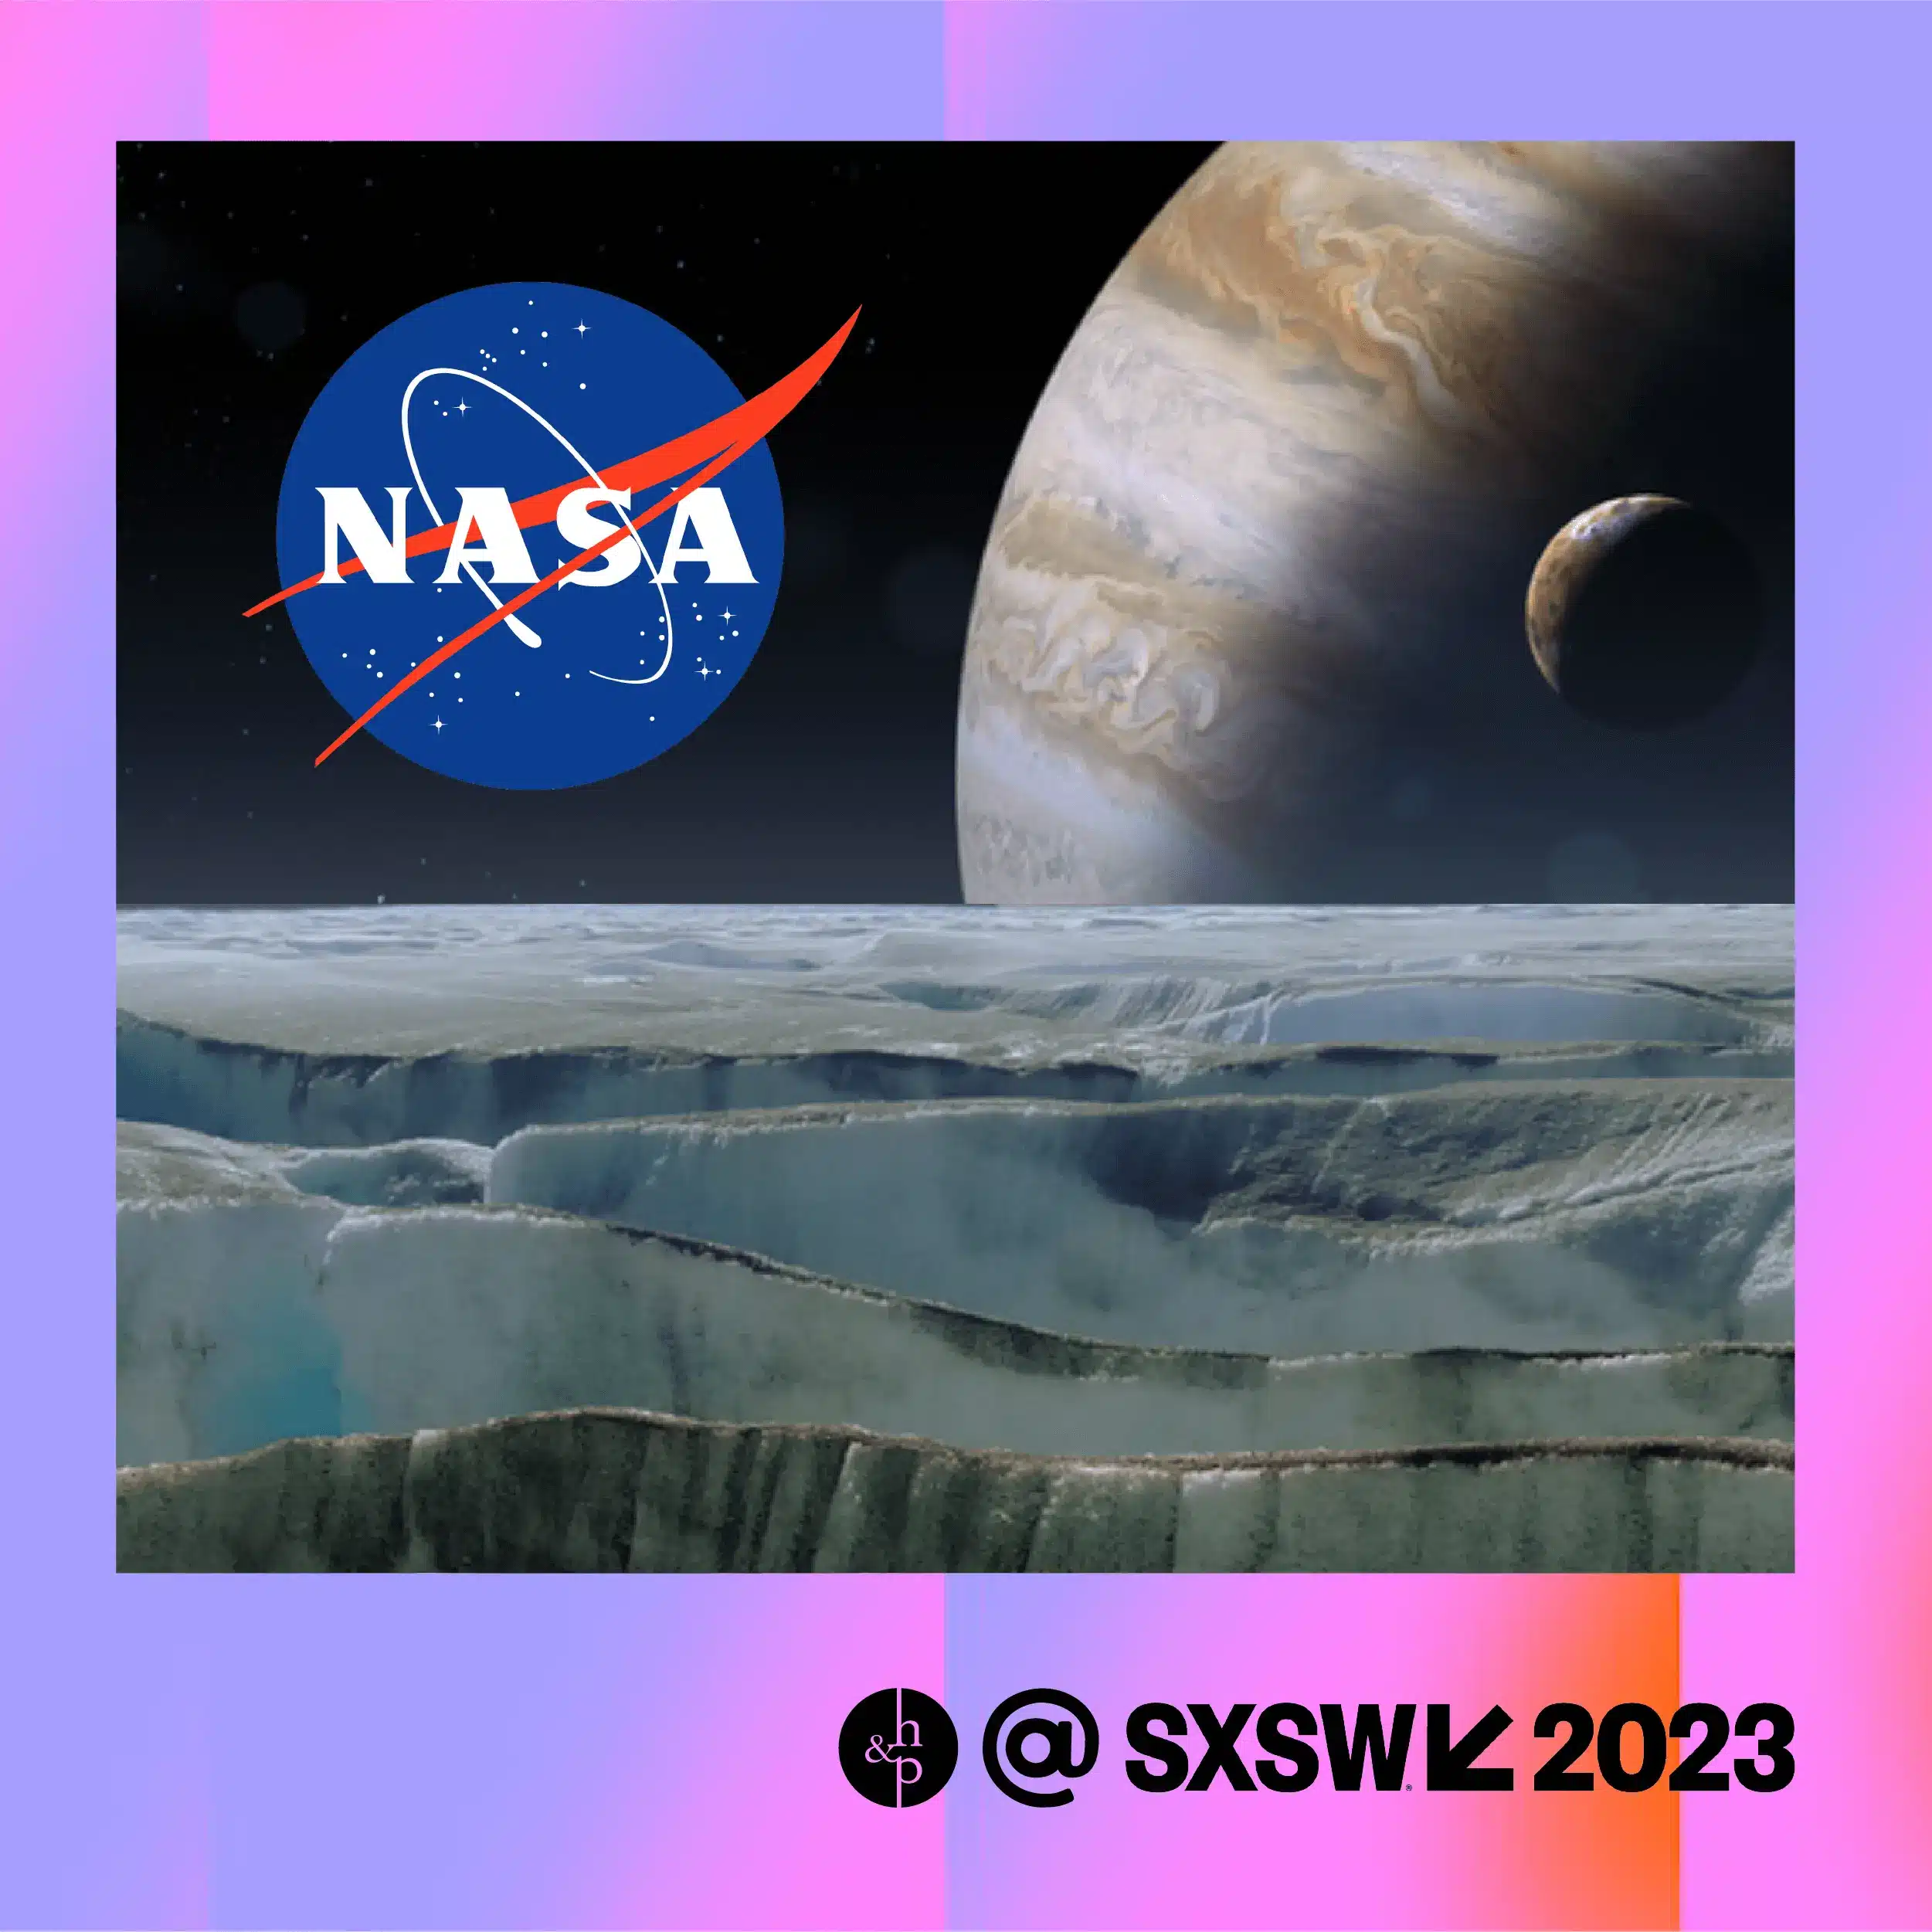 http://H&P%20Attends%20NASA%20Combines%20Art%20and%20Science%20to%20Connect